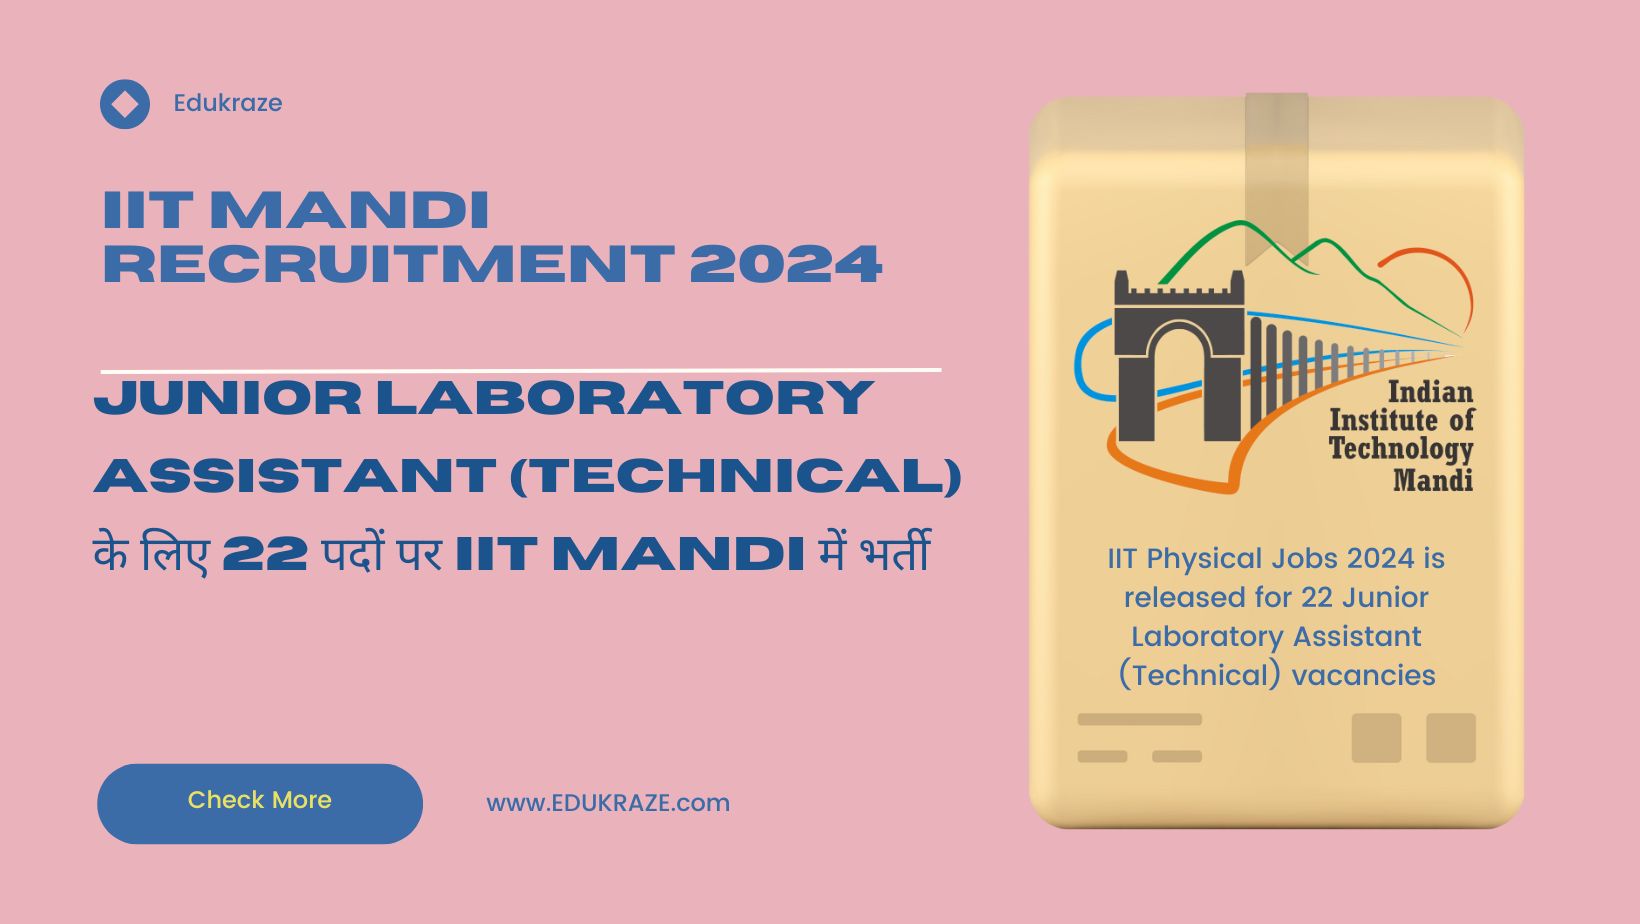 IIT Mandi Recruitment 2024 Notification Out for Junior Laboratory Assistant (Technical)